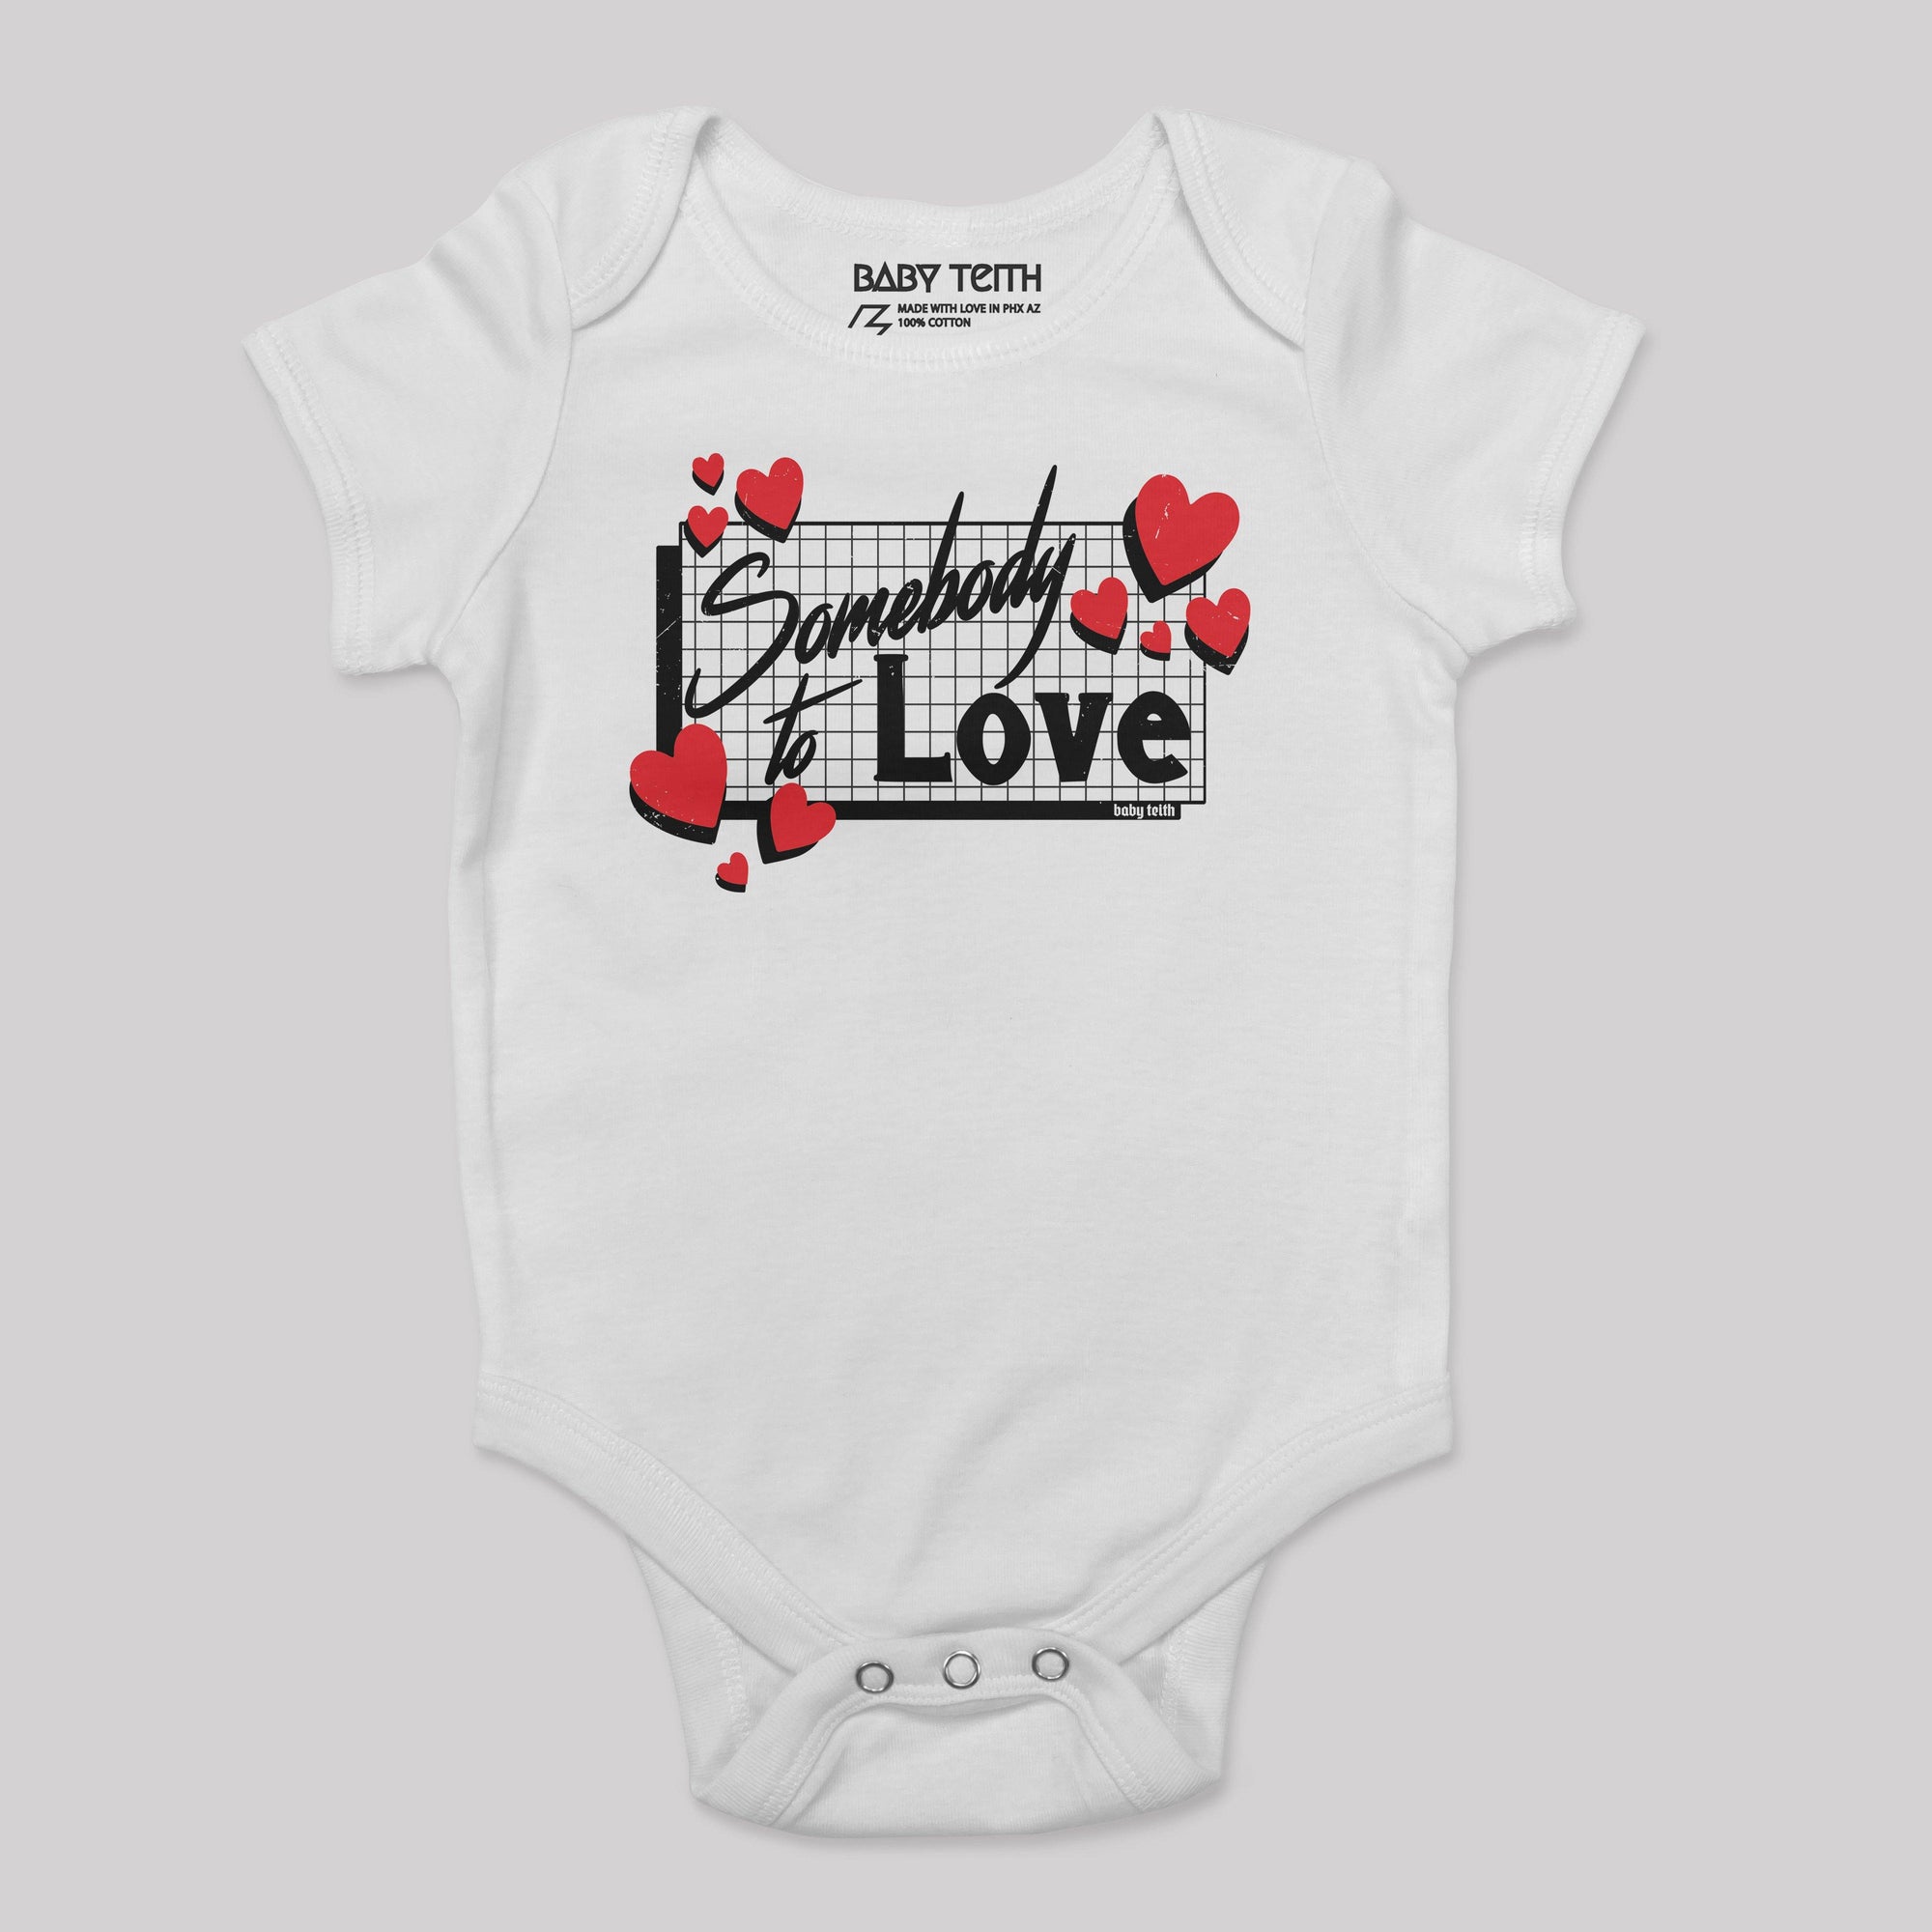 "Somebody to Love" 80's Bodysuit for Babies - Baby Teith